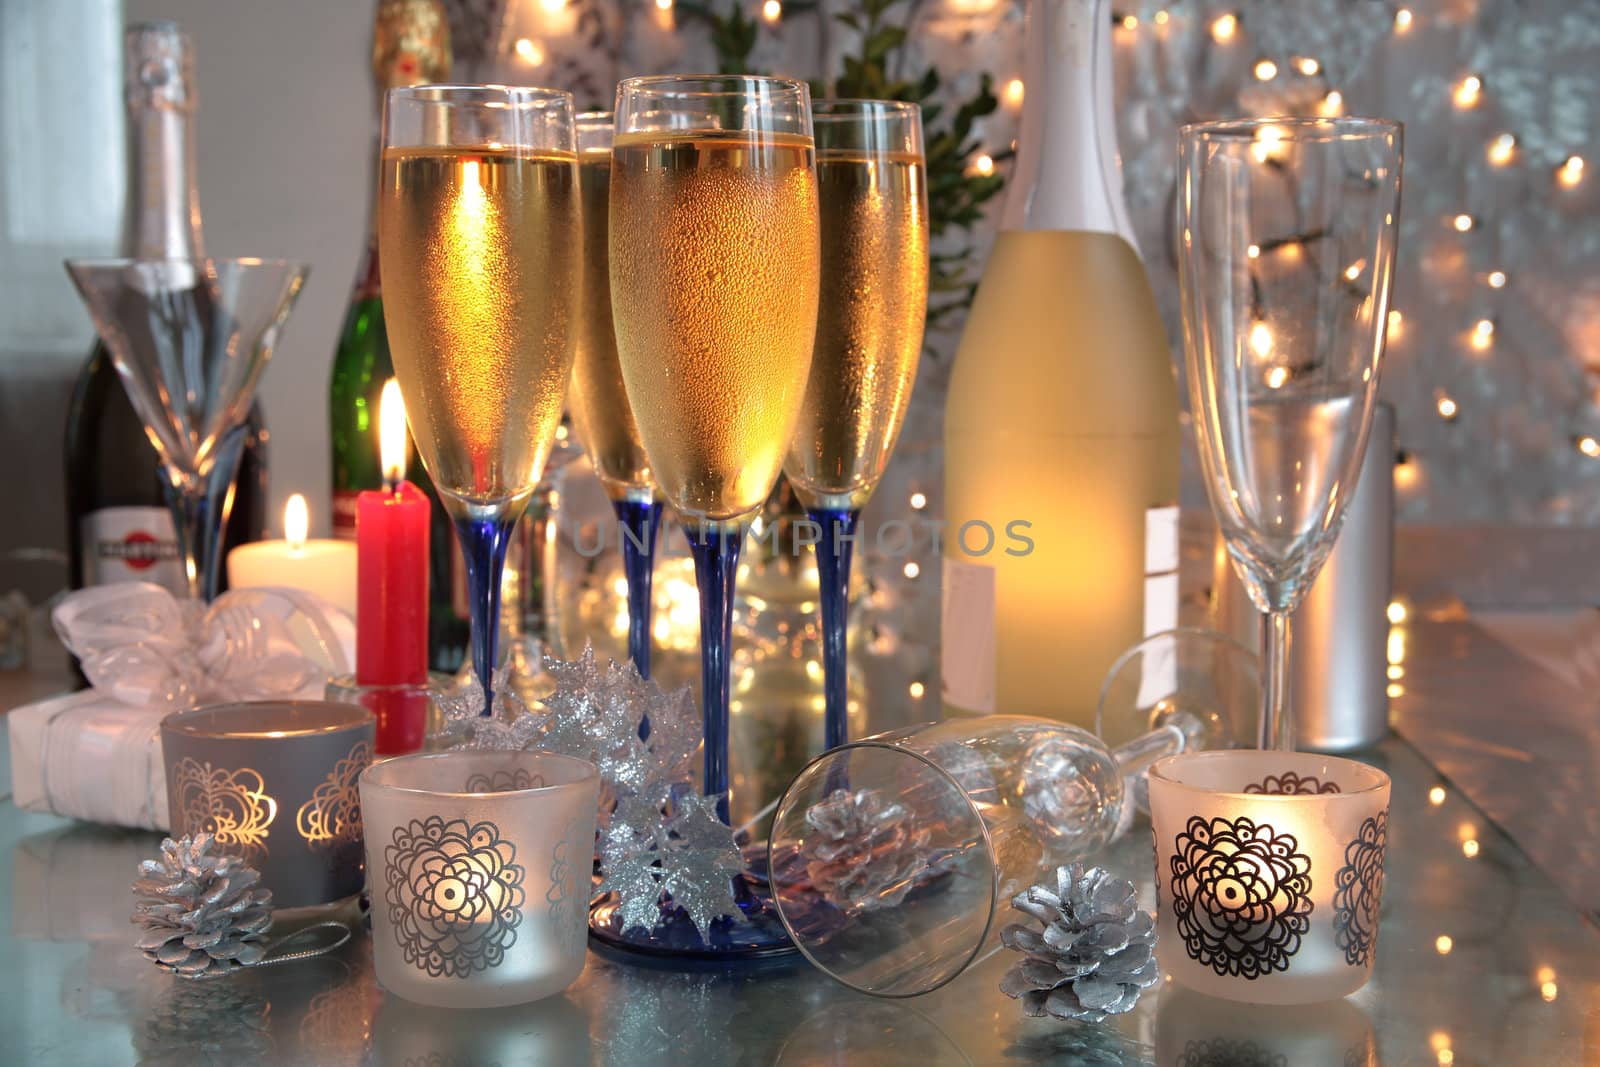 Champagne in glasses,bottles, candle lights and blurred lights on background.